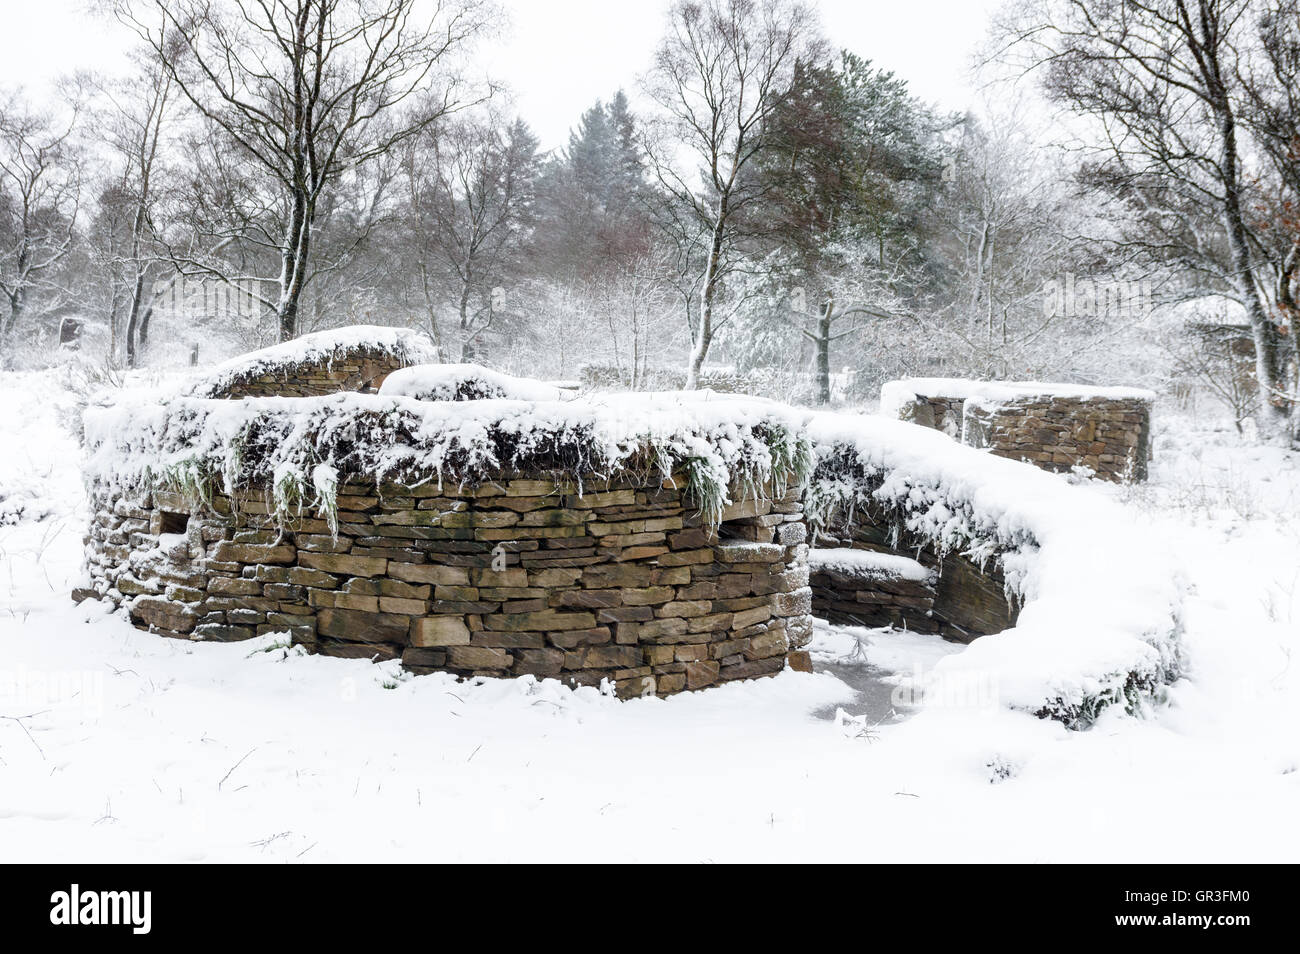 Drystone walls (or dykes in Scotland) are walls built without any mortar to bind the stones together. Stock Photo